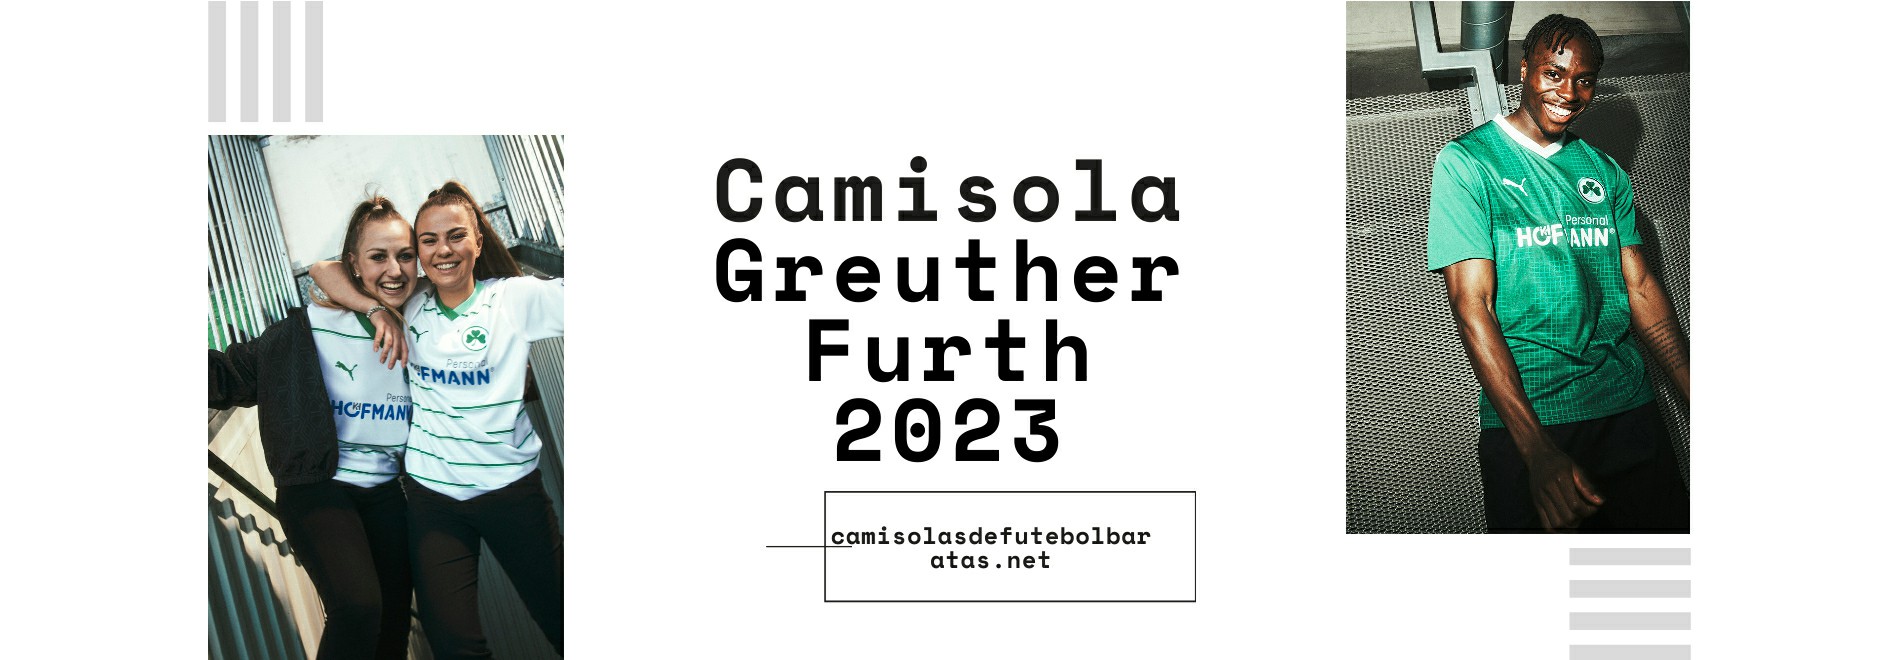 Camisola Greuther Furth 2023-2024